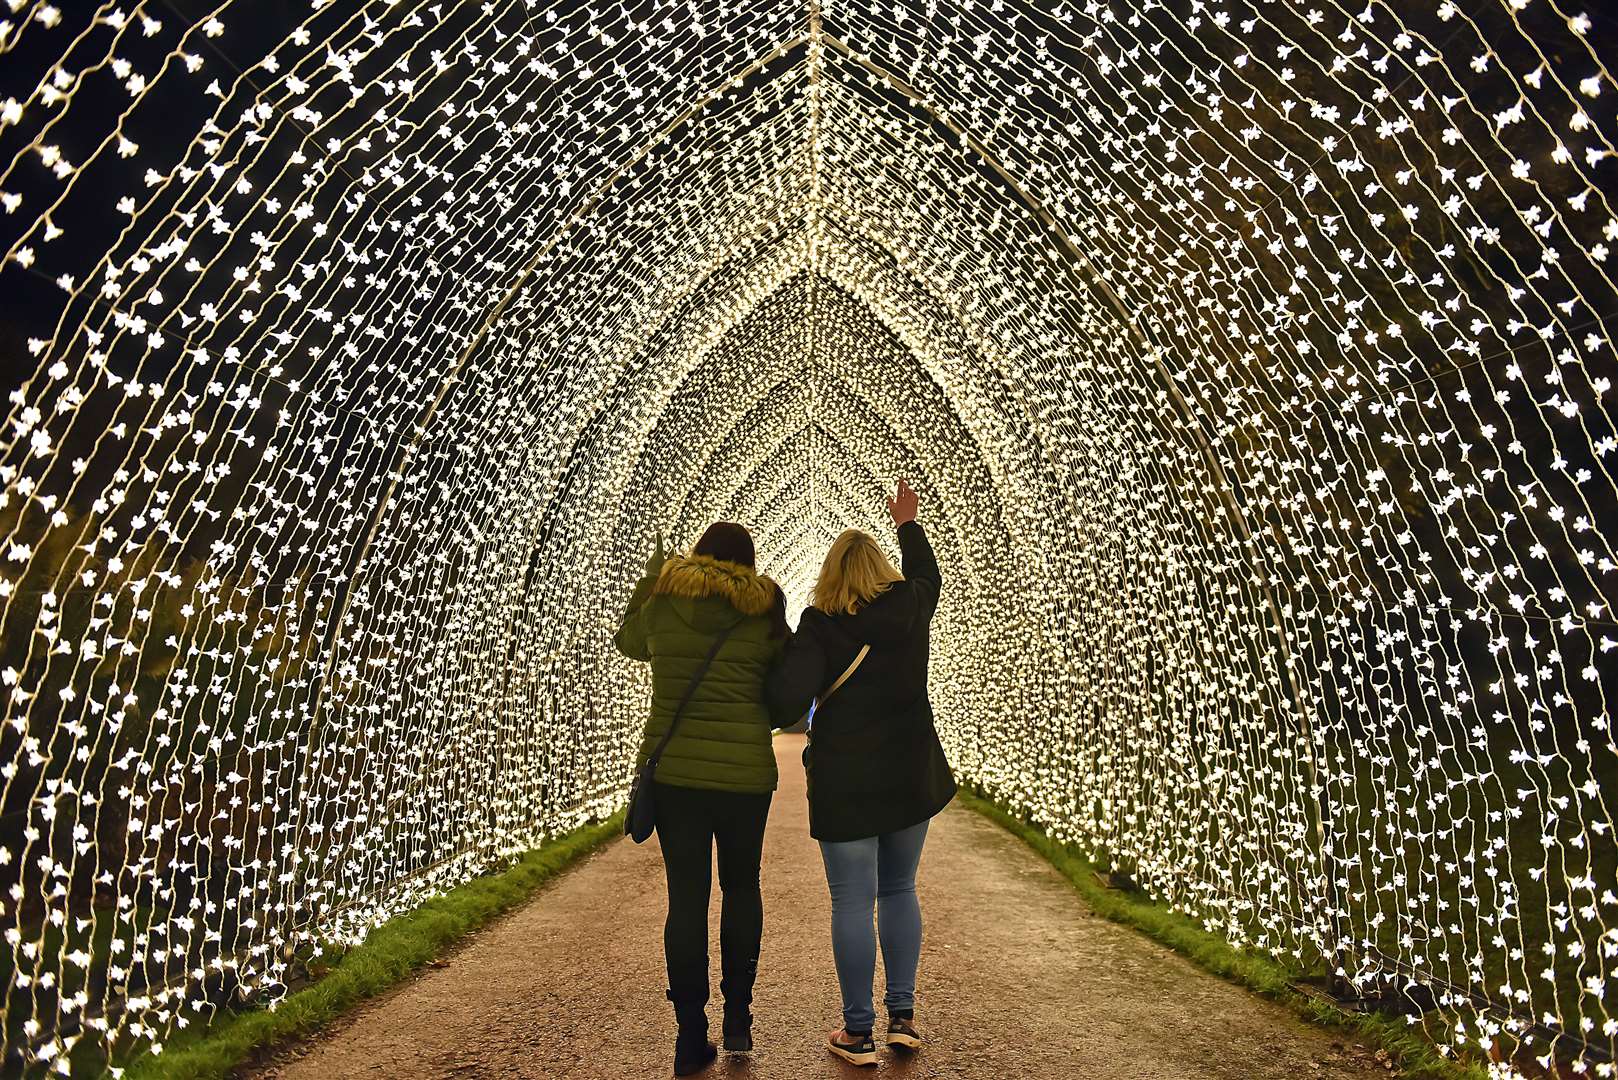 The Tunnel of Light is due to return this winter